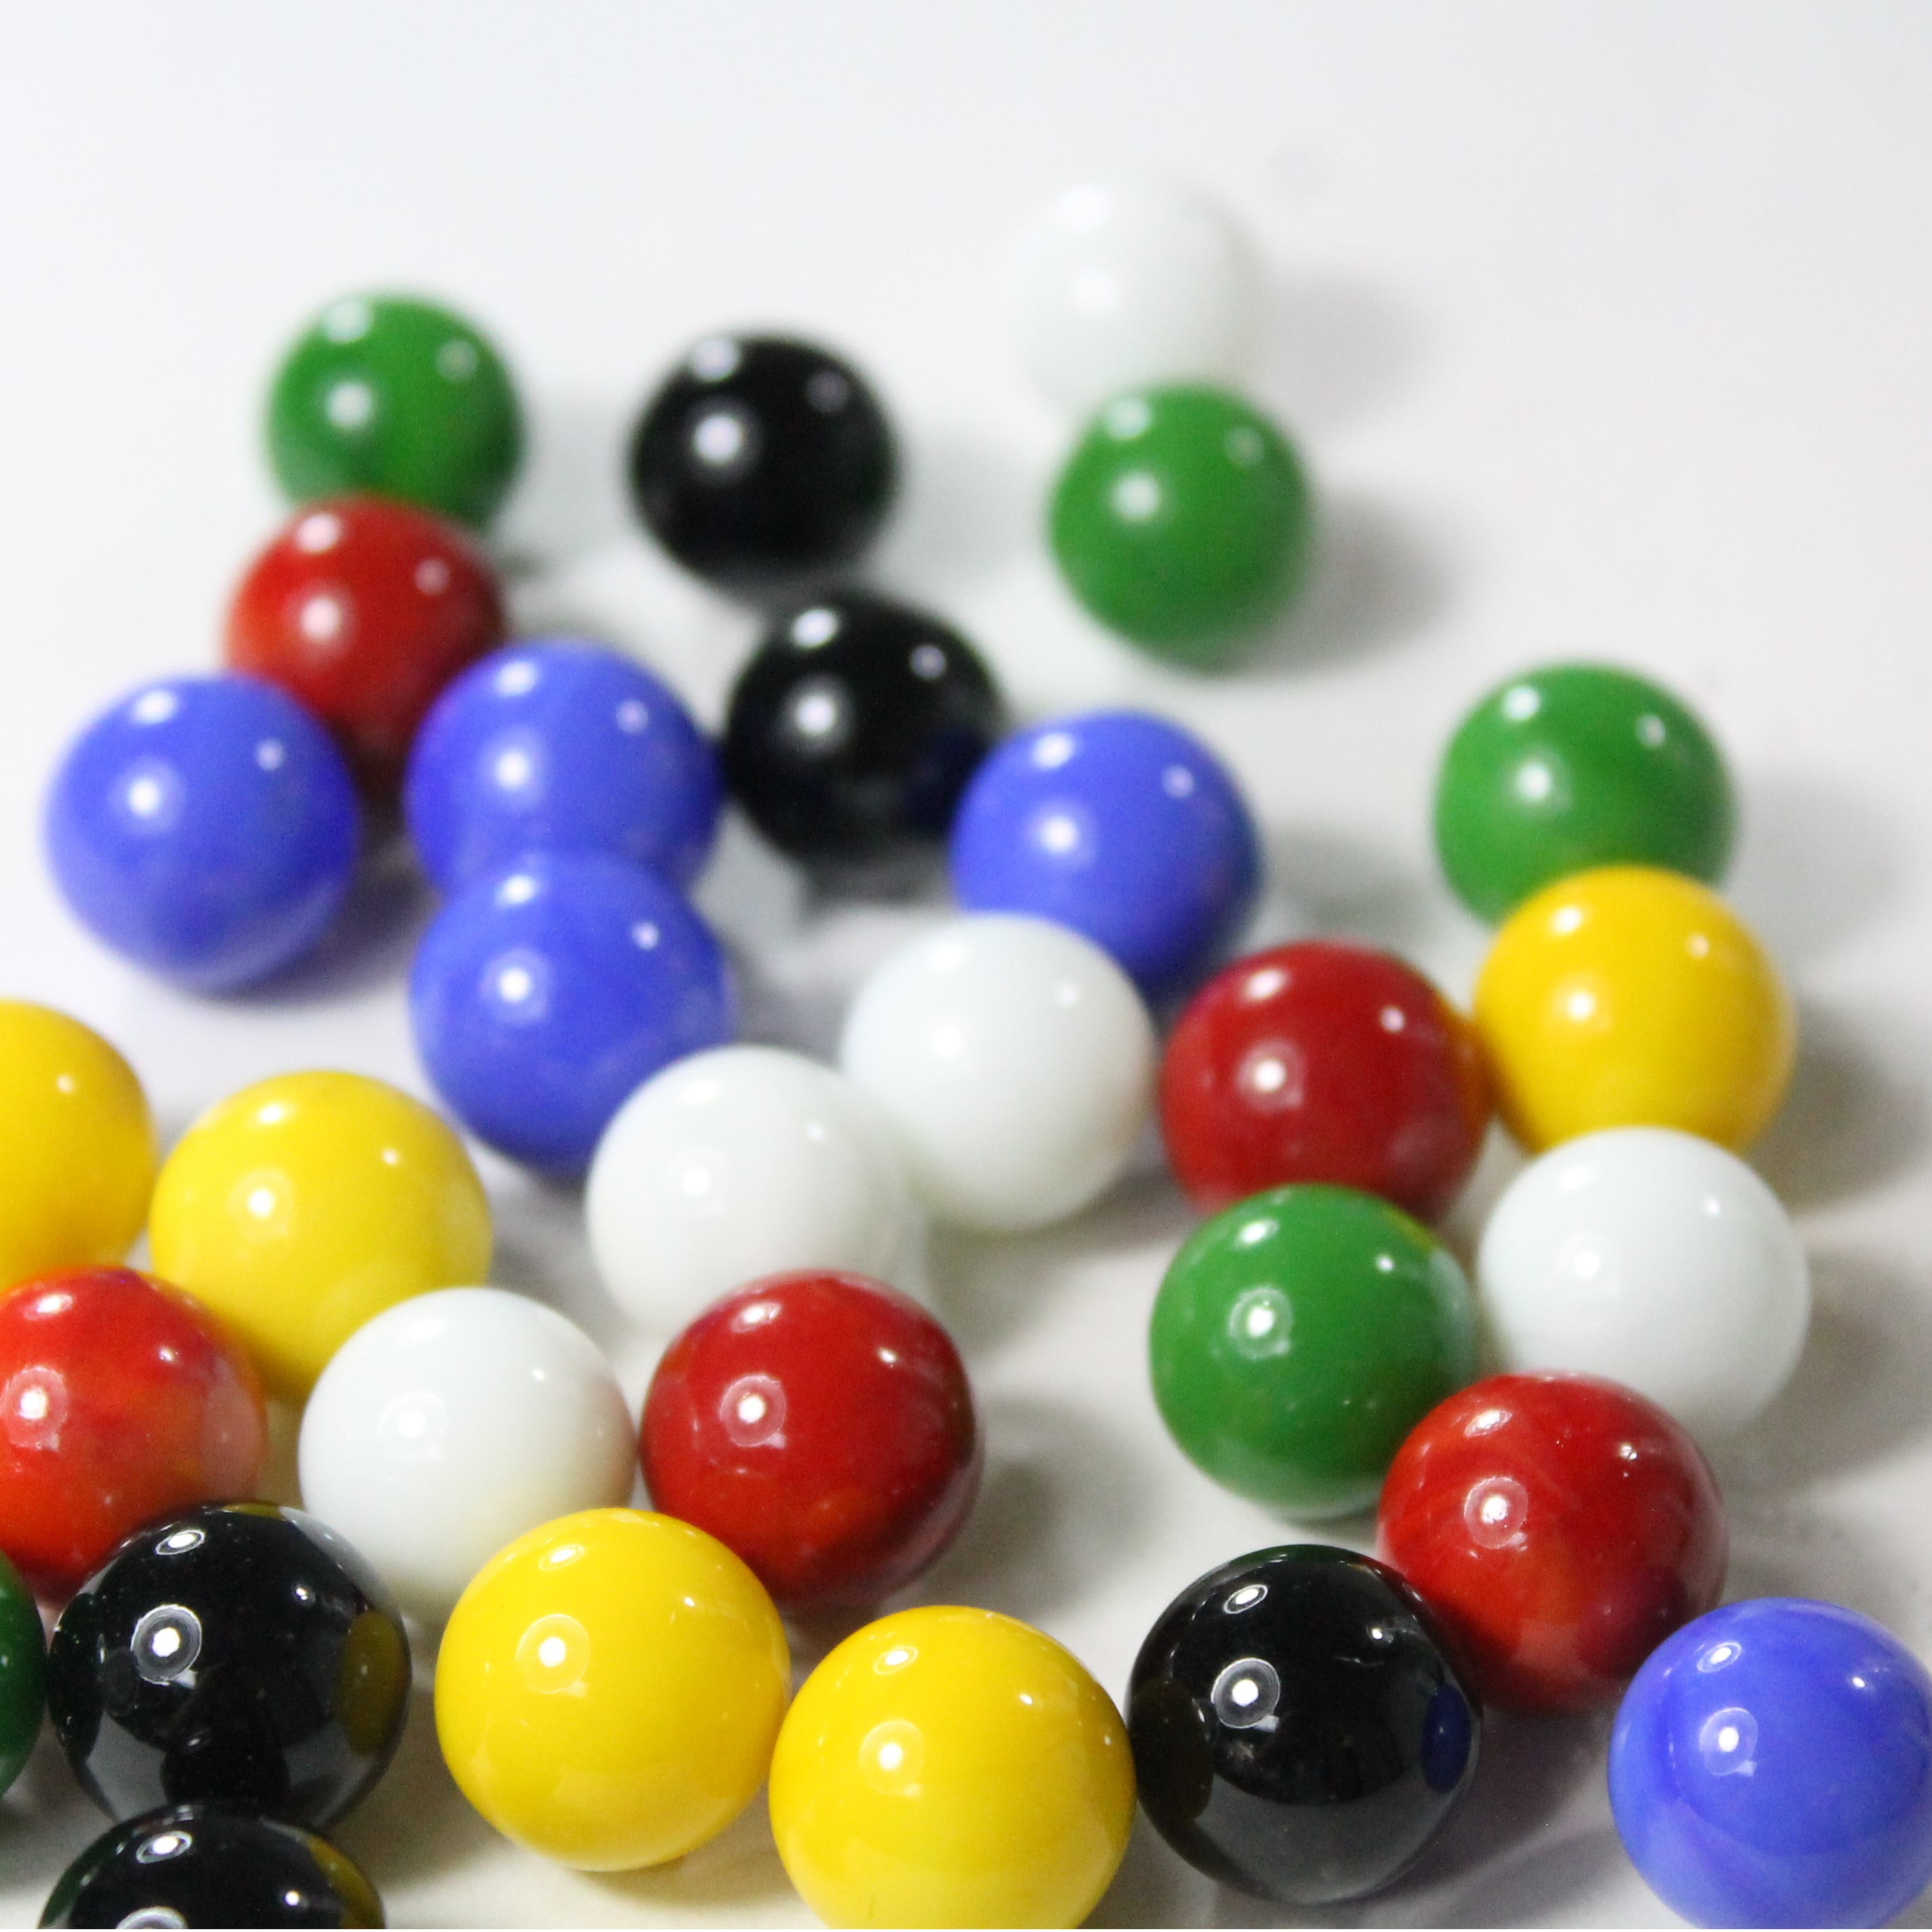 30 Solid Color Replacement Marbles Chinese Checkers Aggravation game 14mm GLASS 